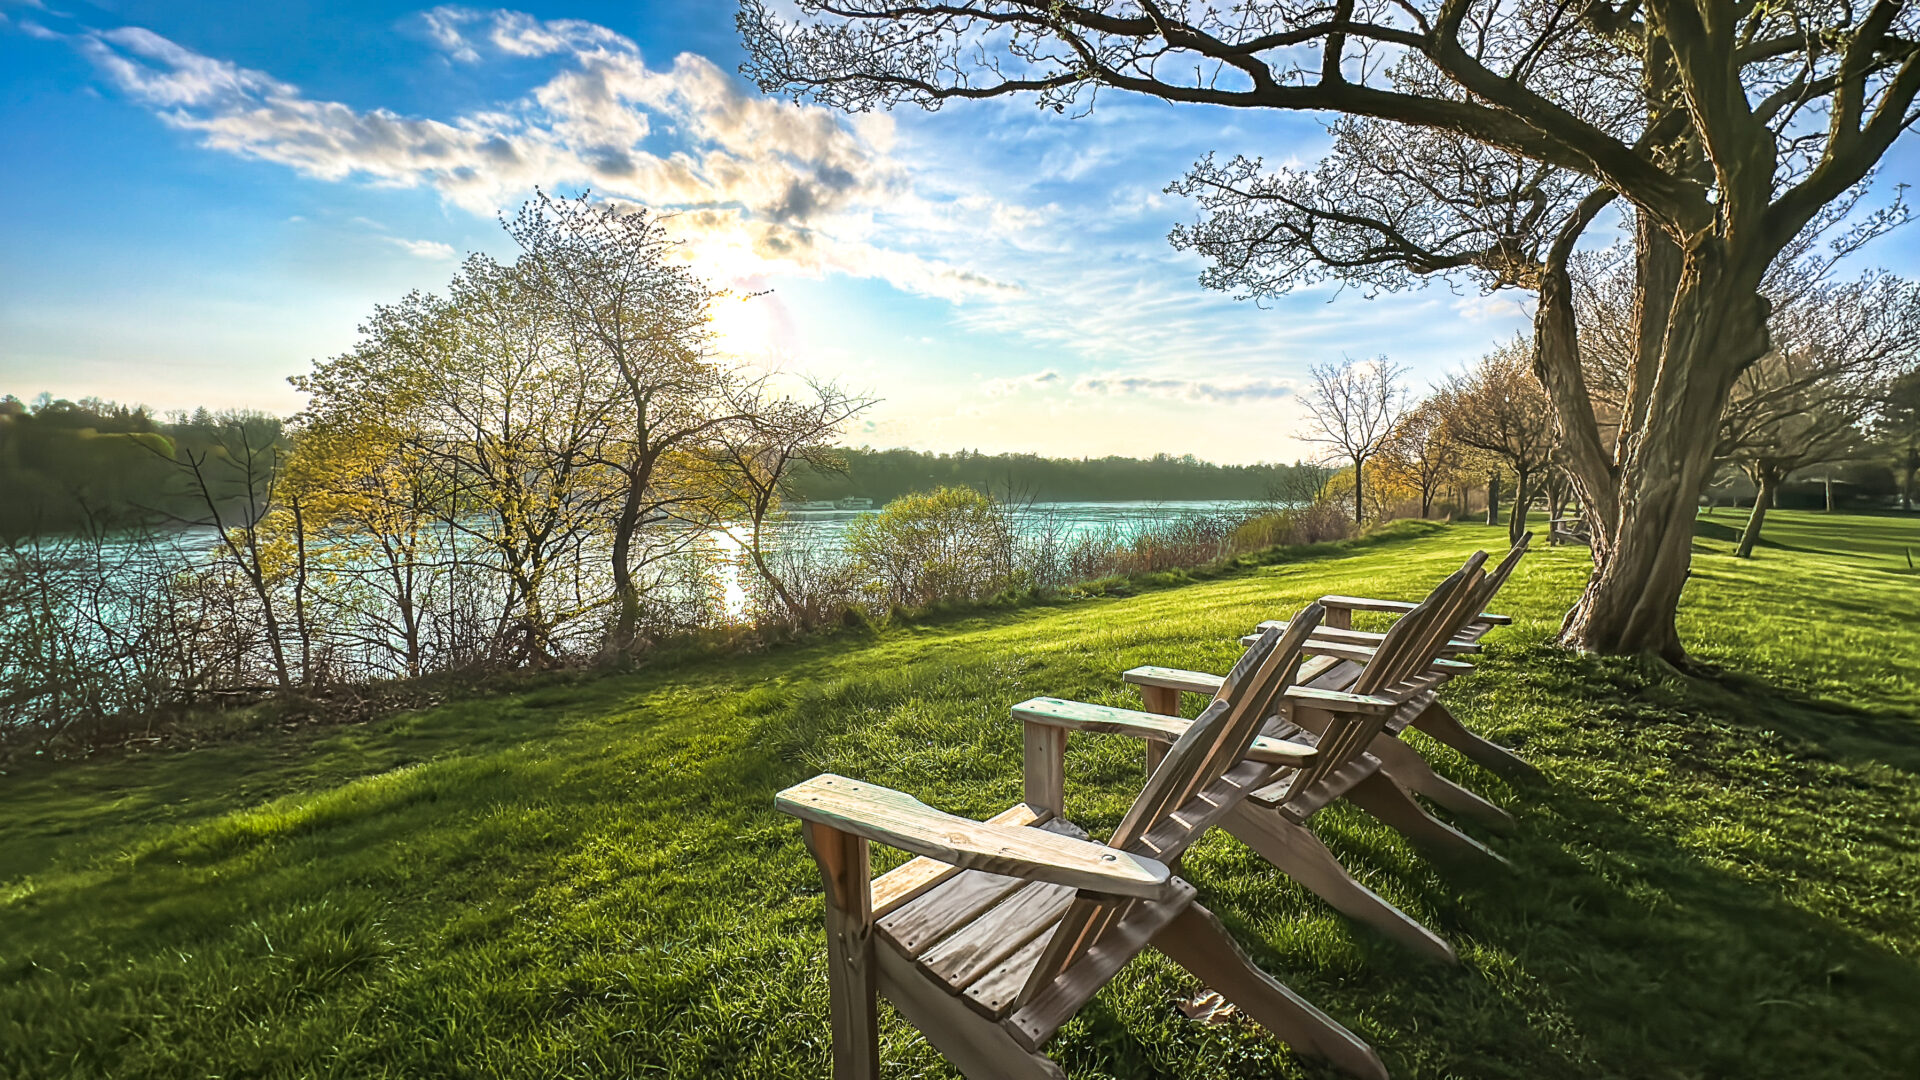 Sunset photo with dramatic skies, as the turquoise waters of the Niagara River flow in the background, while in the foreground, lush lawn bathed in golden light and three Adirondack chairs propped for prime viewing of the beaten path river scene